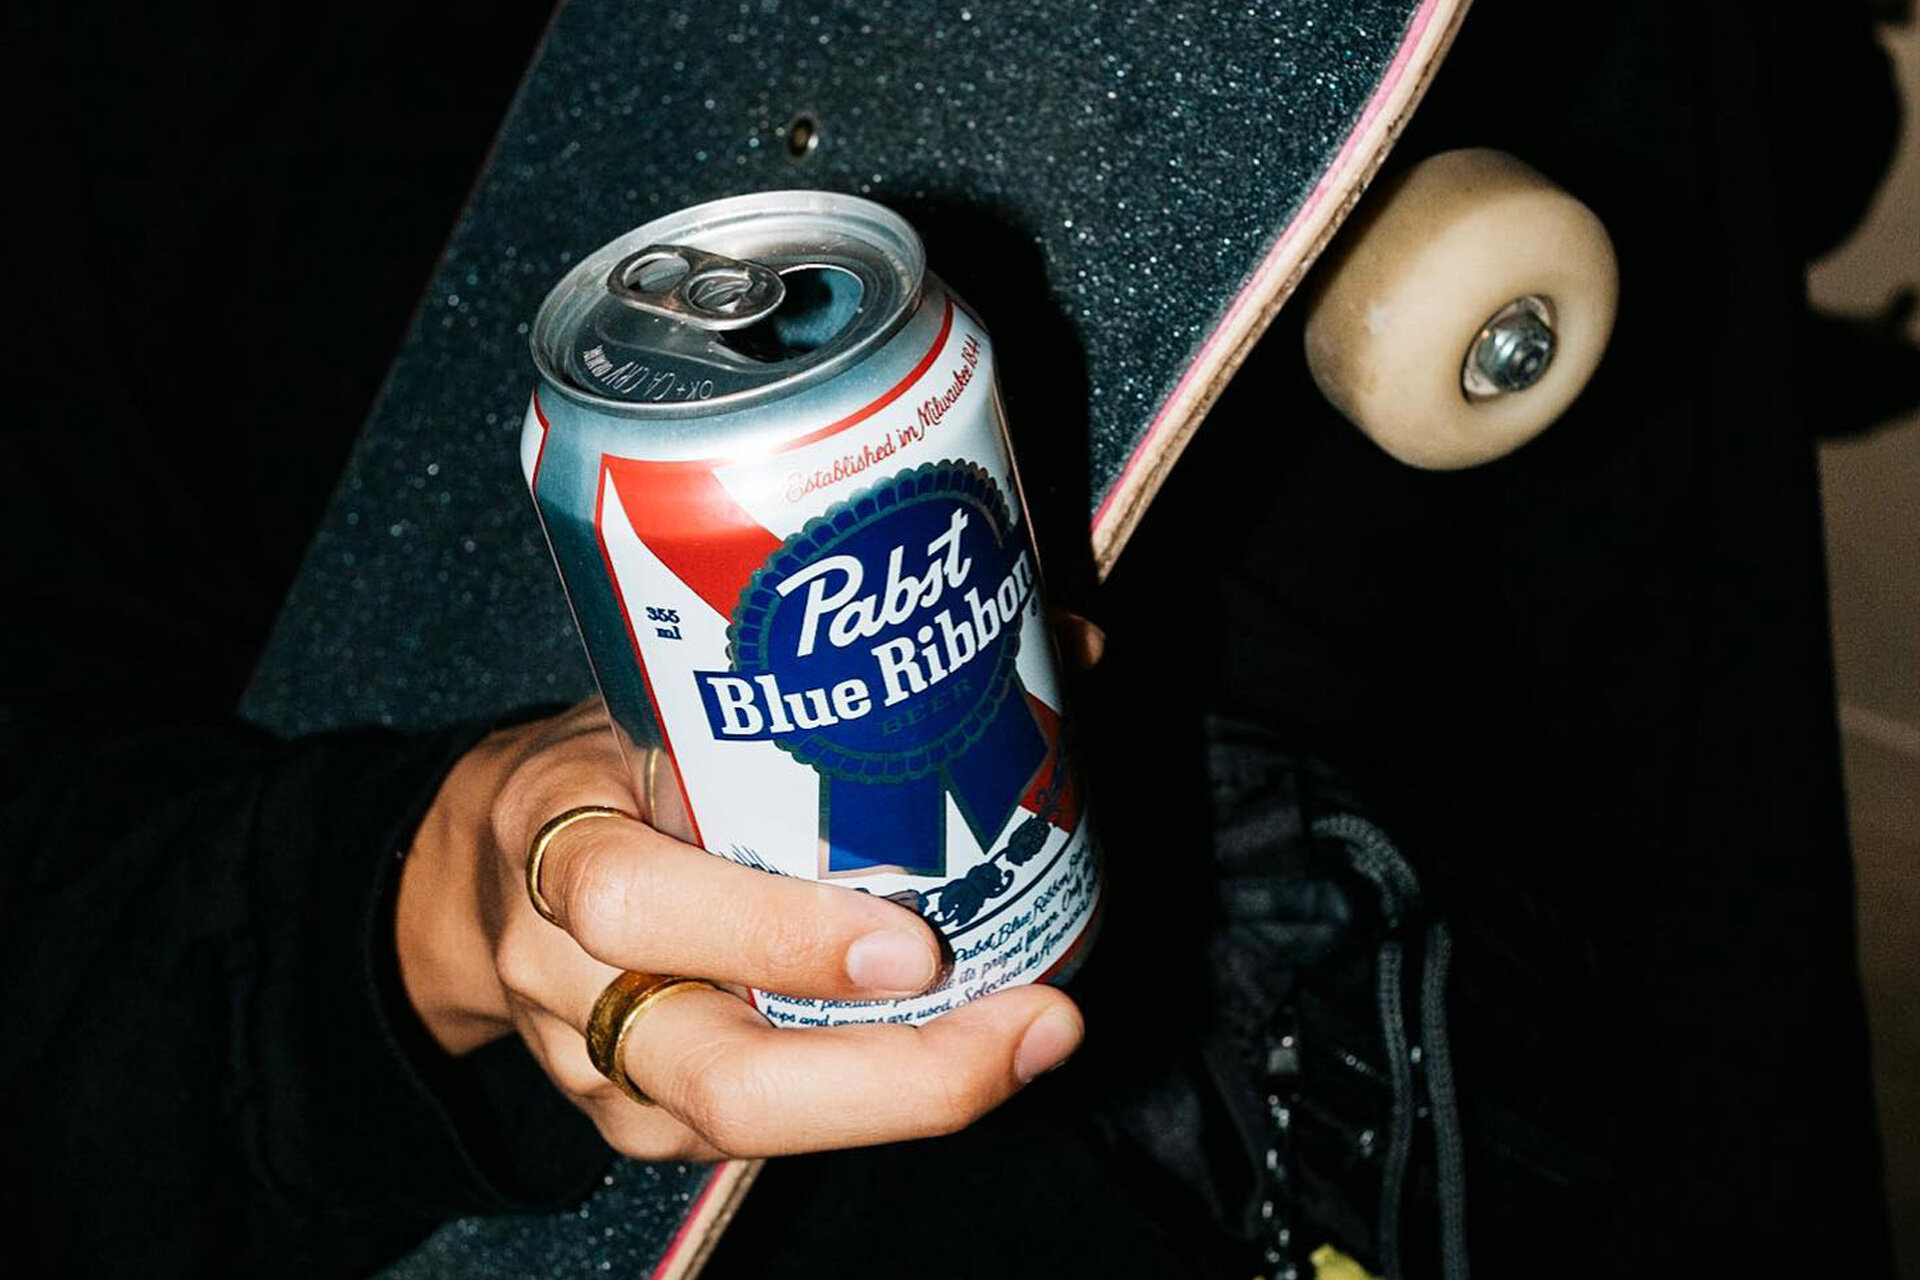 Is Pabst Blue Ribbon Good